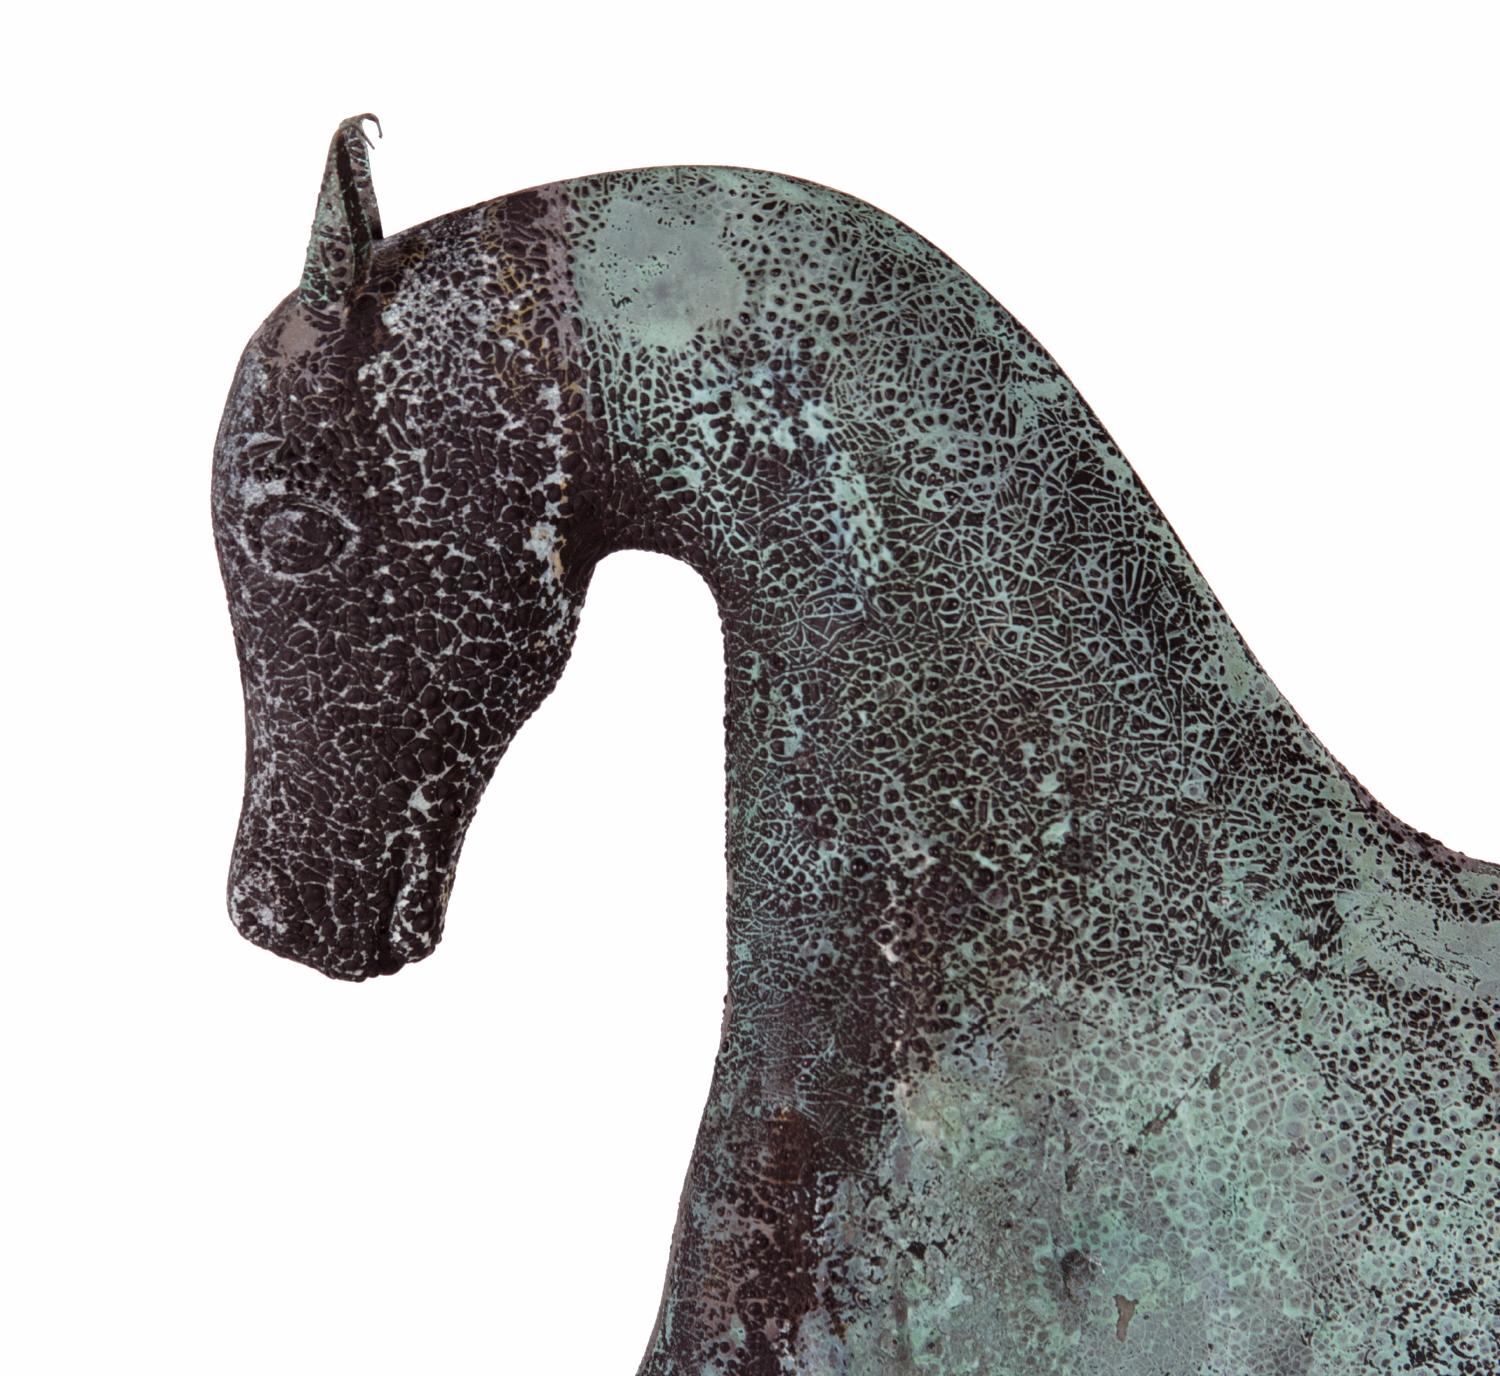 American Prancing Horse Weathervane, Attributed to Jewel & Co, Waltham, Mass, ca 1860 For Sale